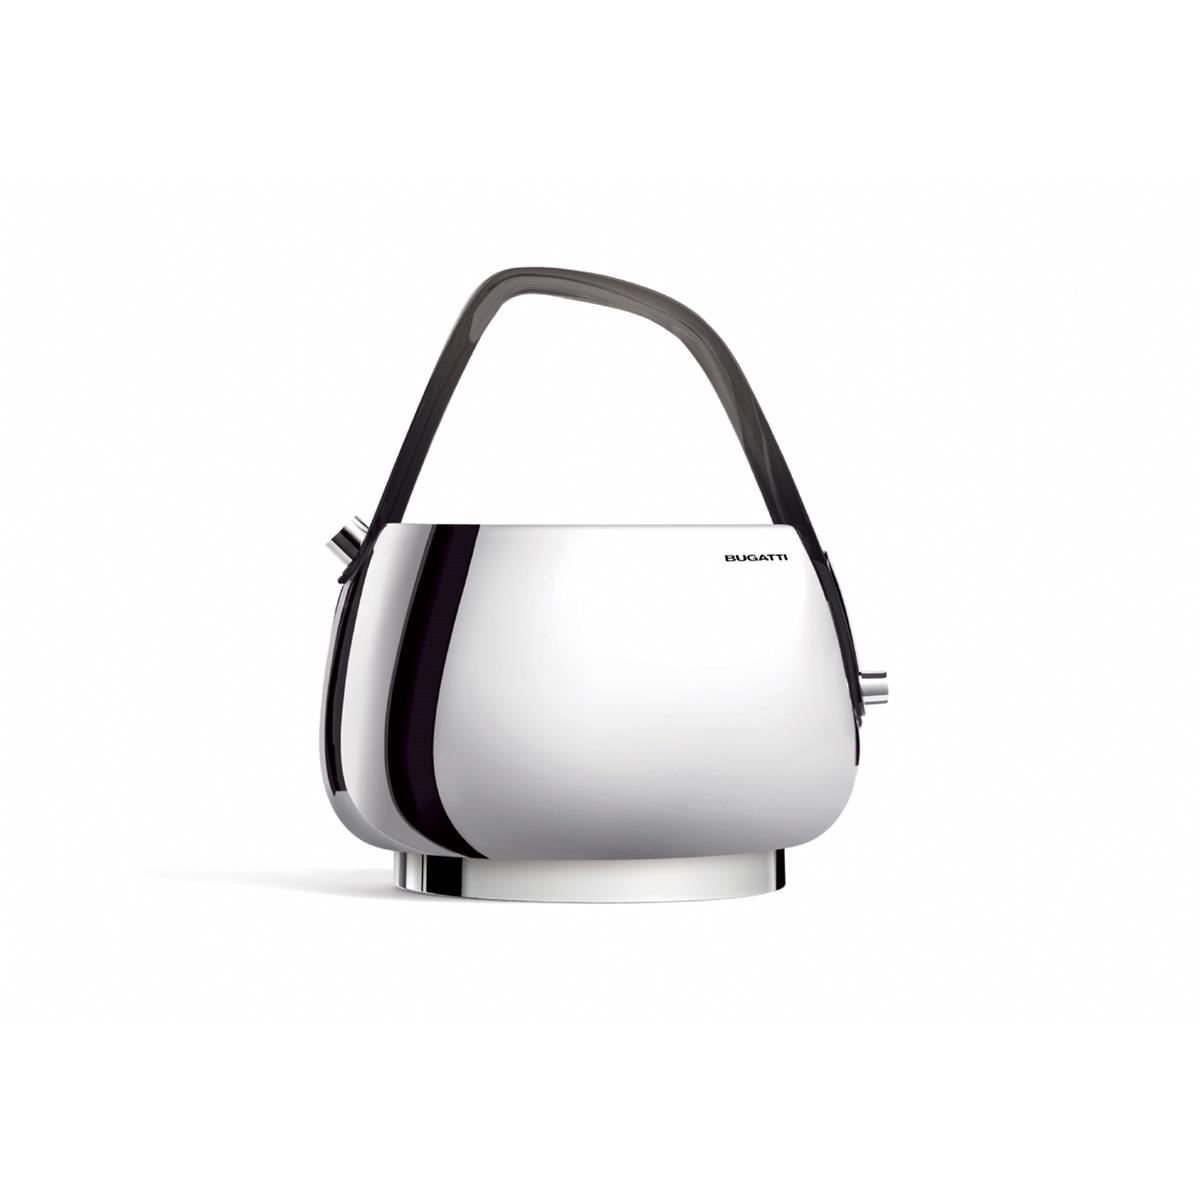 jackie - stainless steel electronic kettle with transparent smoked handle